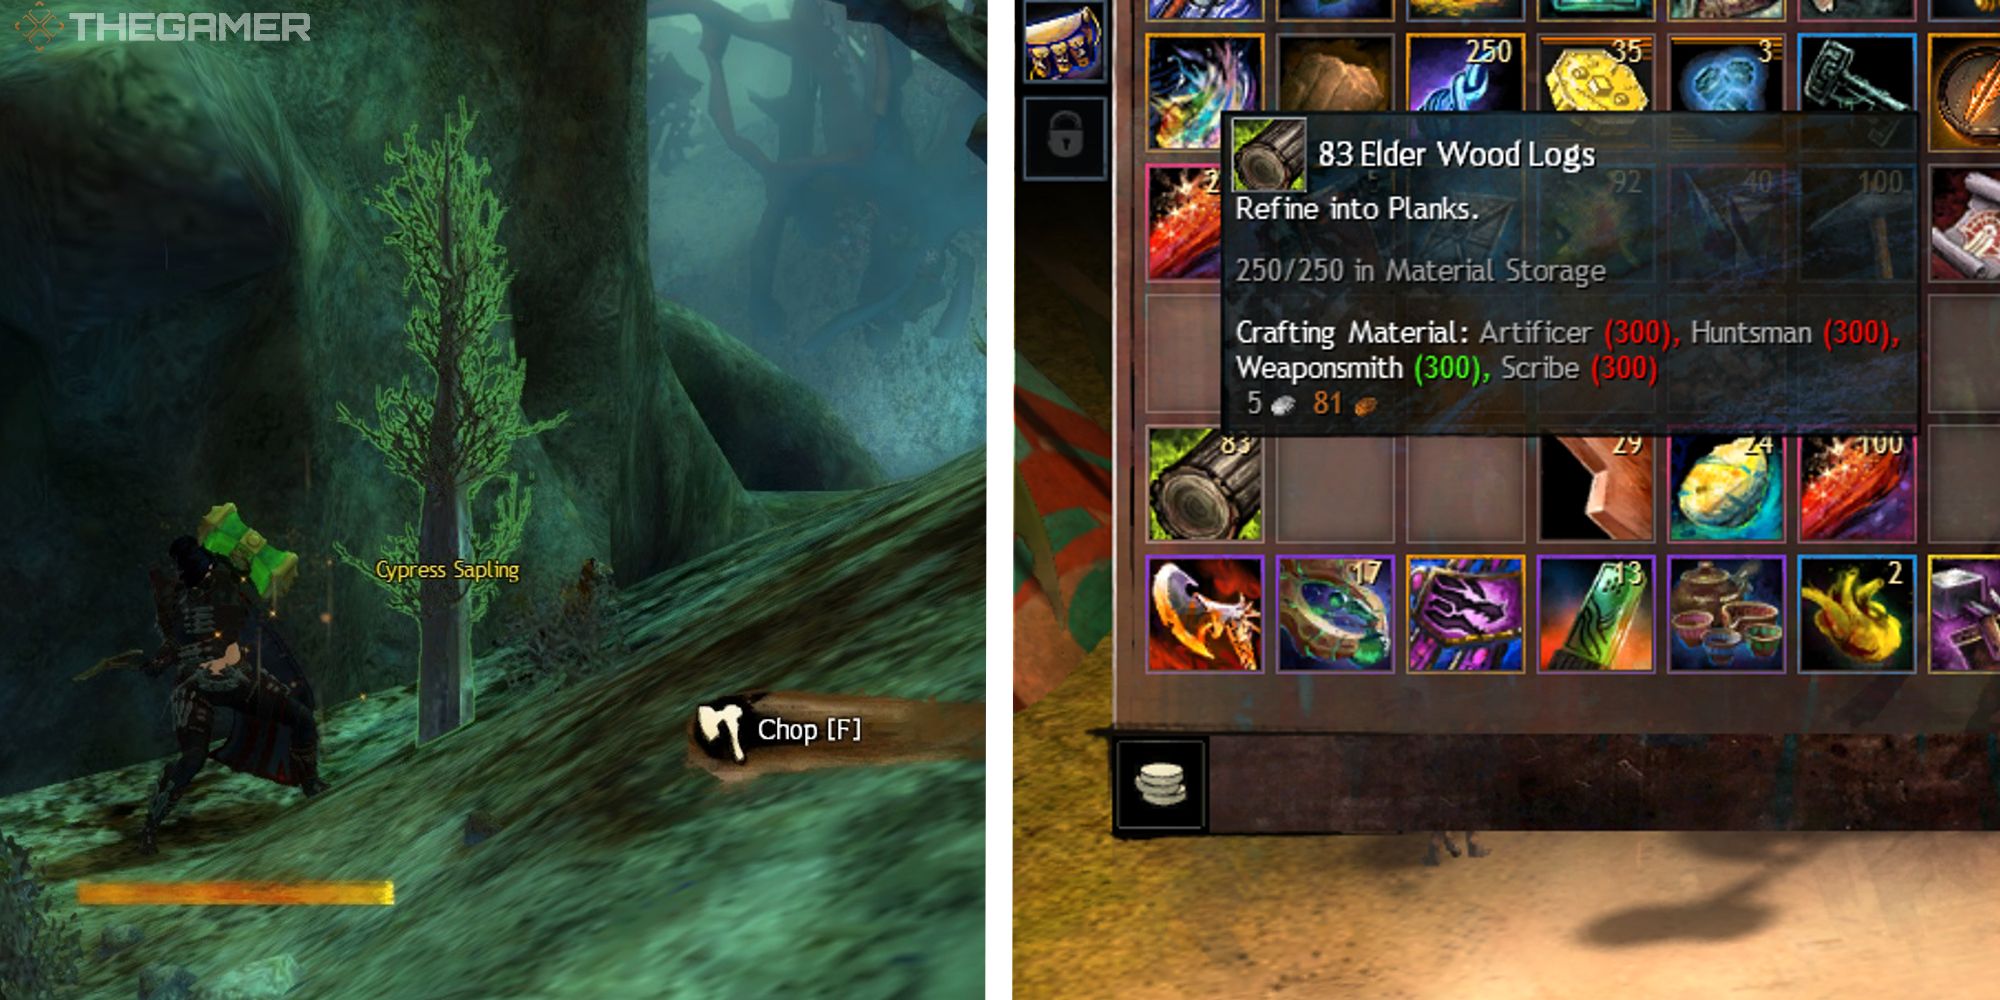 image of player logging next to image of elder wood in inventory